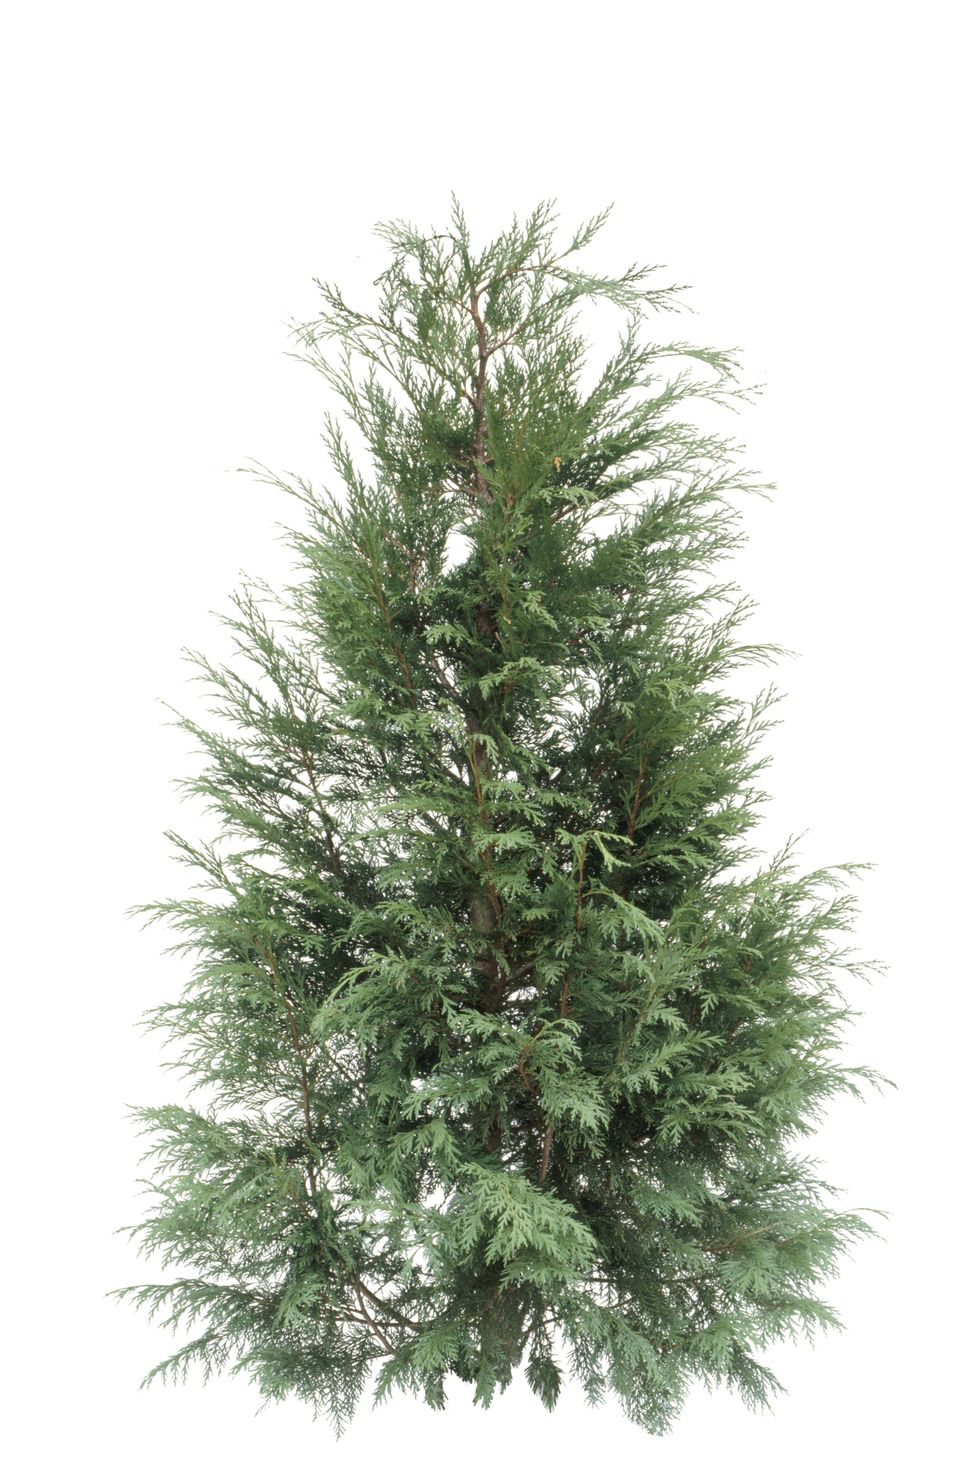 types of Christmas trees leyland cypress